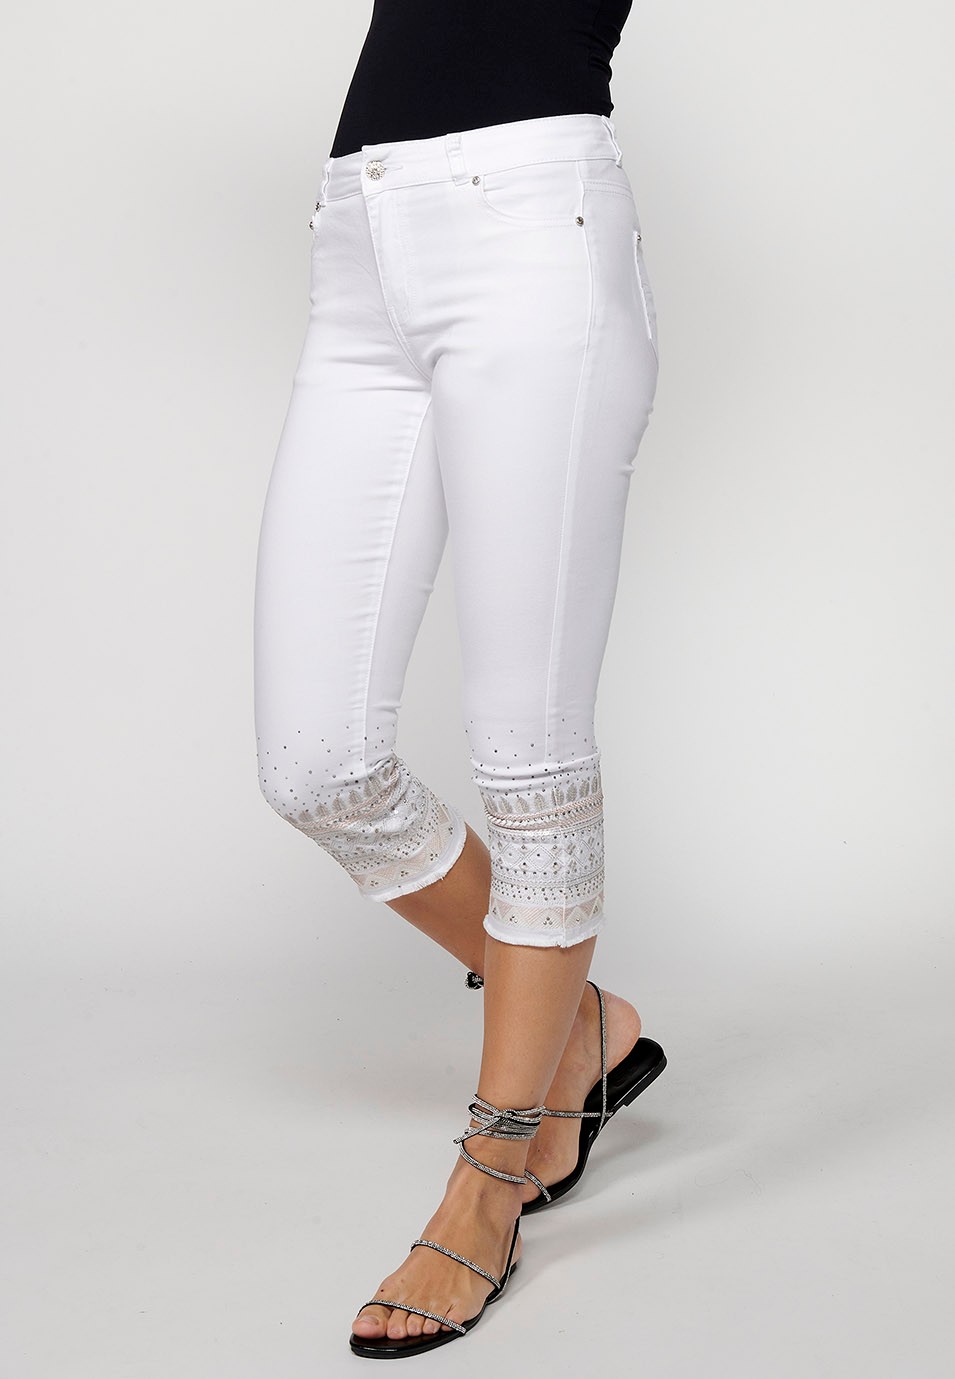 Pirate pants finished with floral embroidery and front closure with zipper and button in White for Women 4